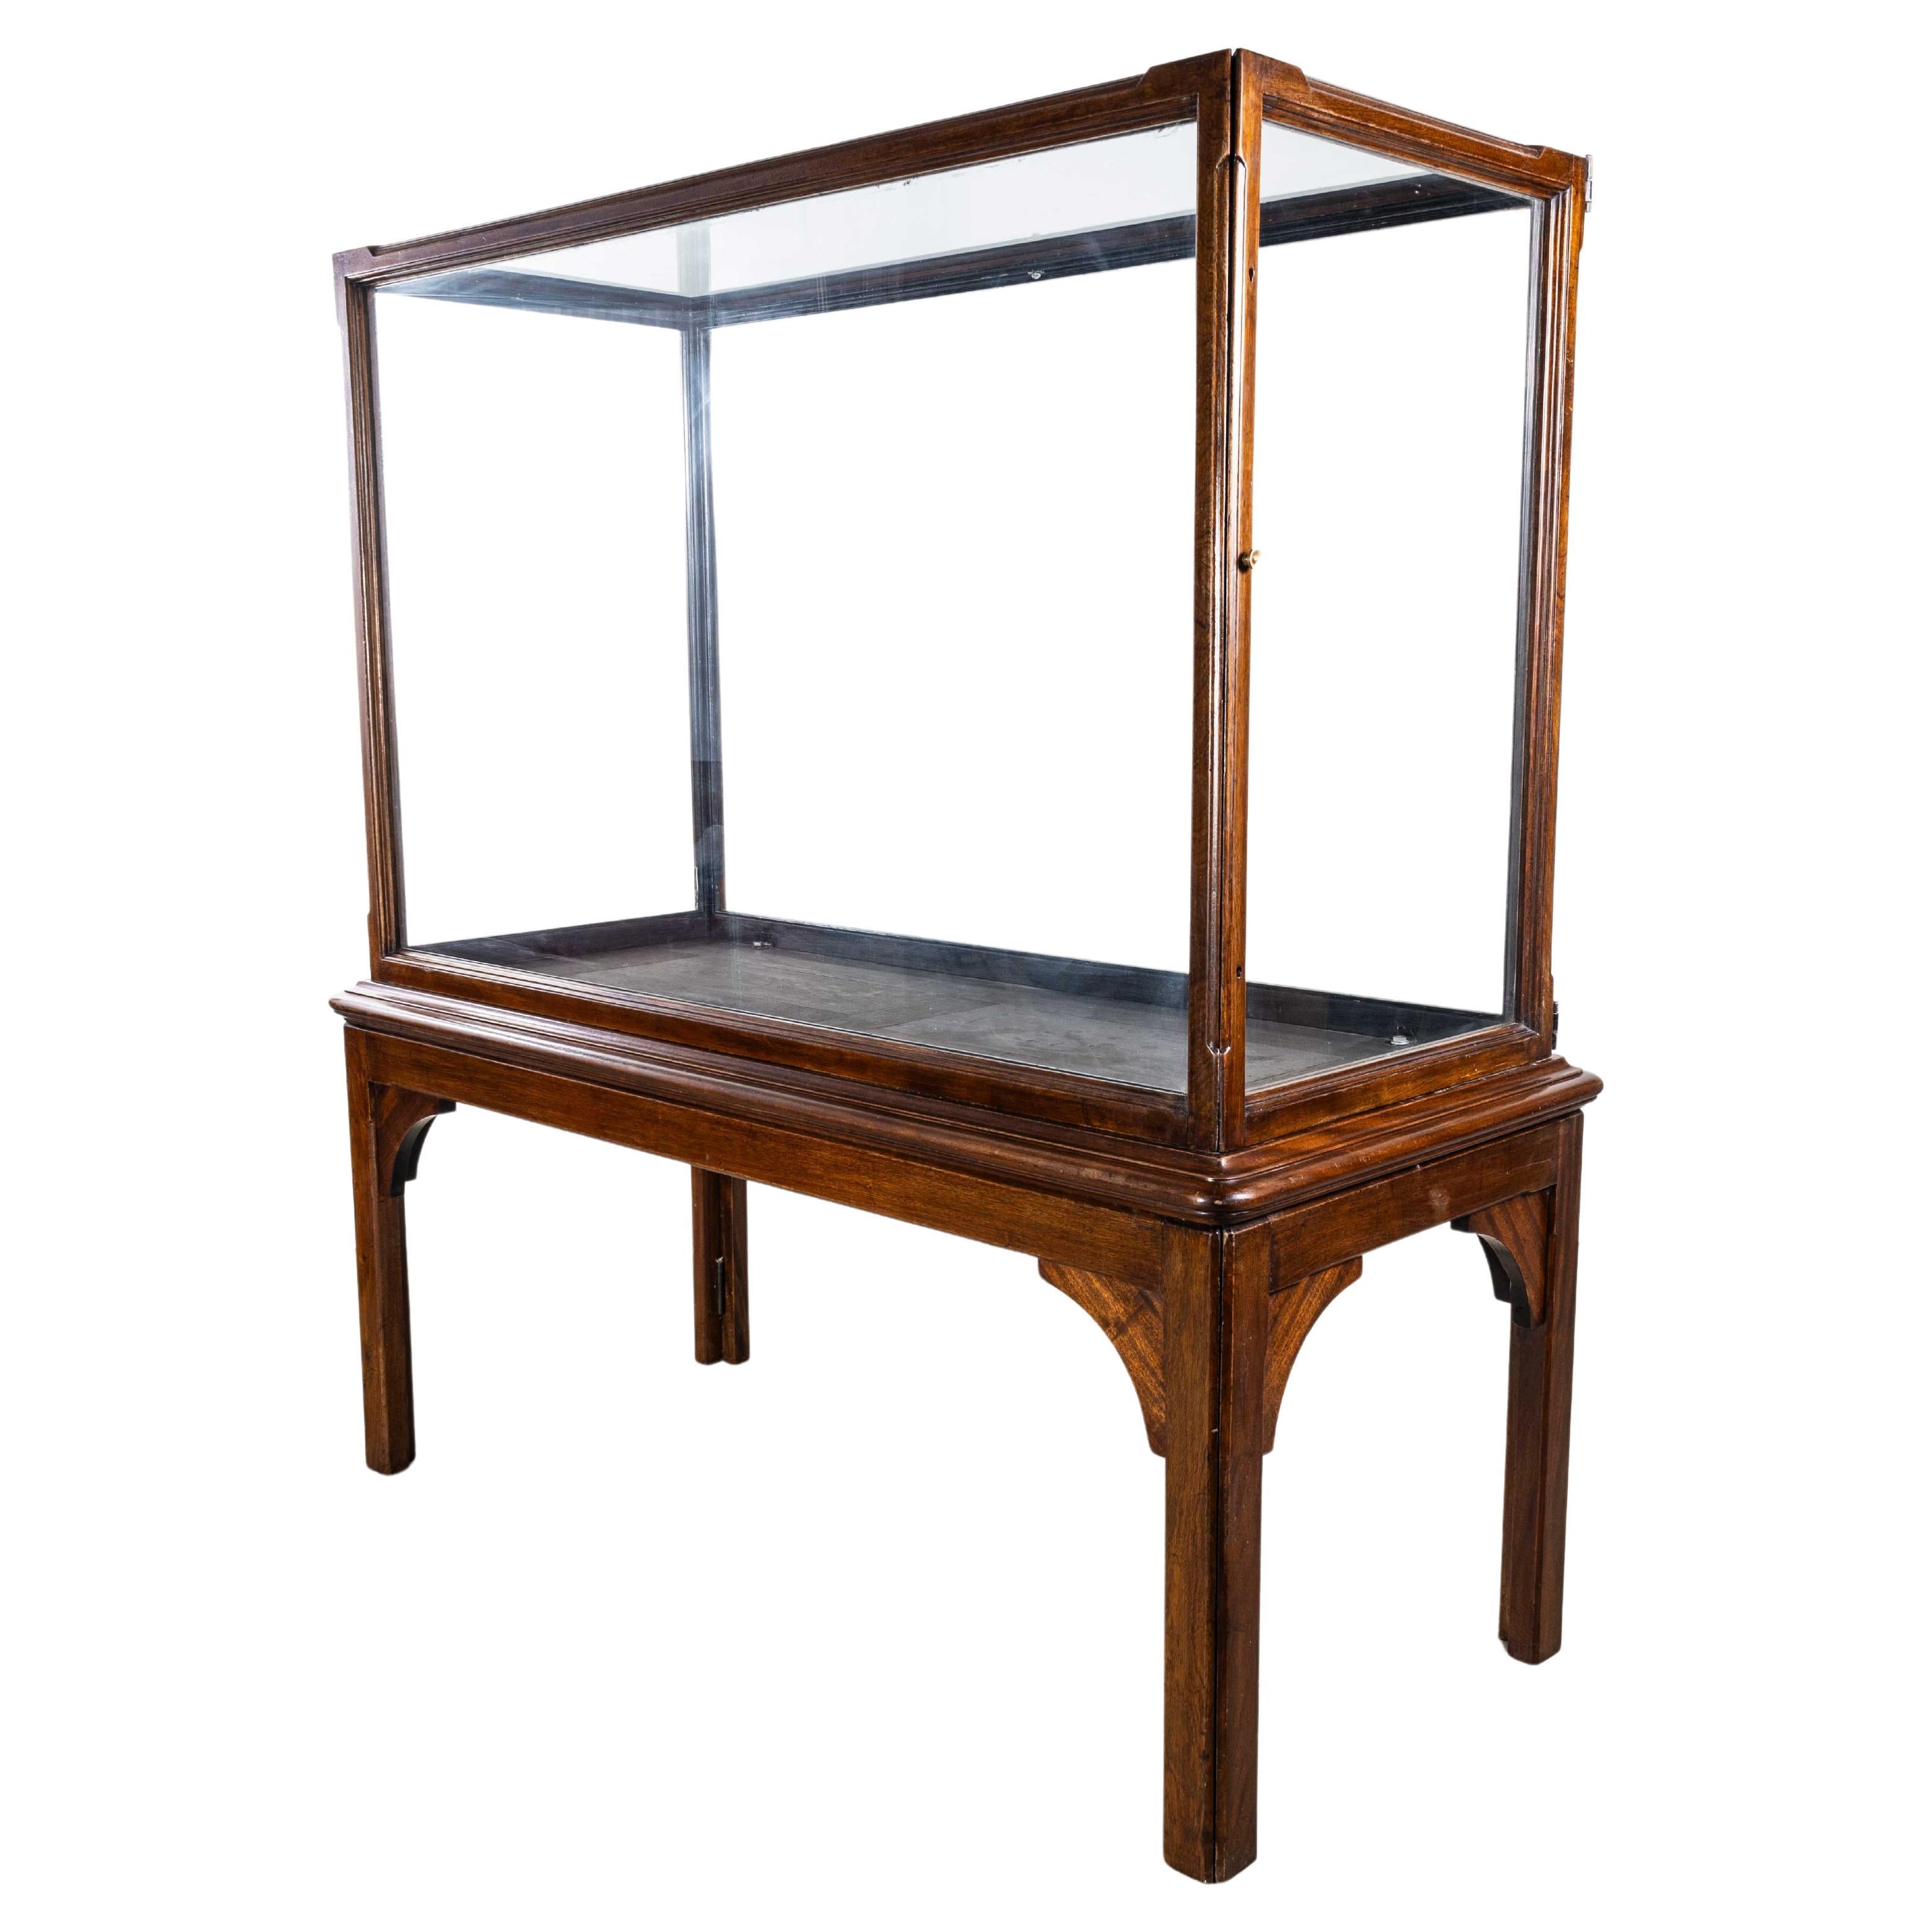 1890's Large Victorian Mahogany Museum Display Case